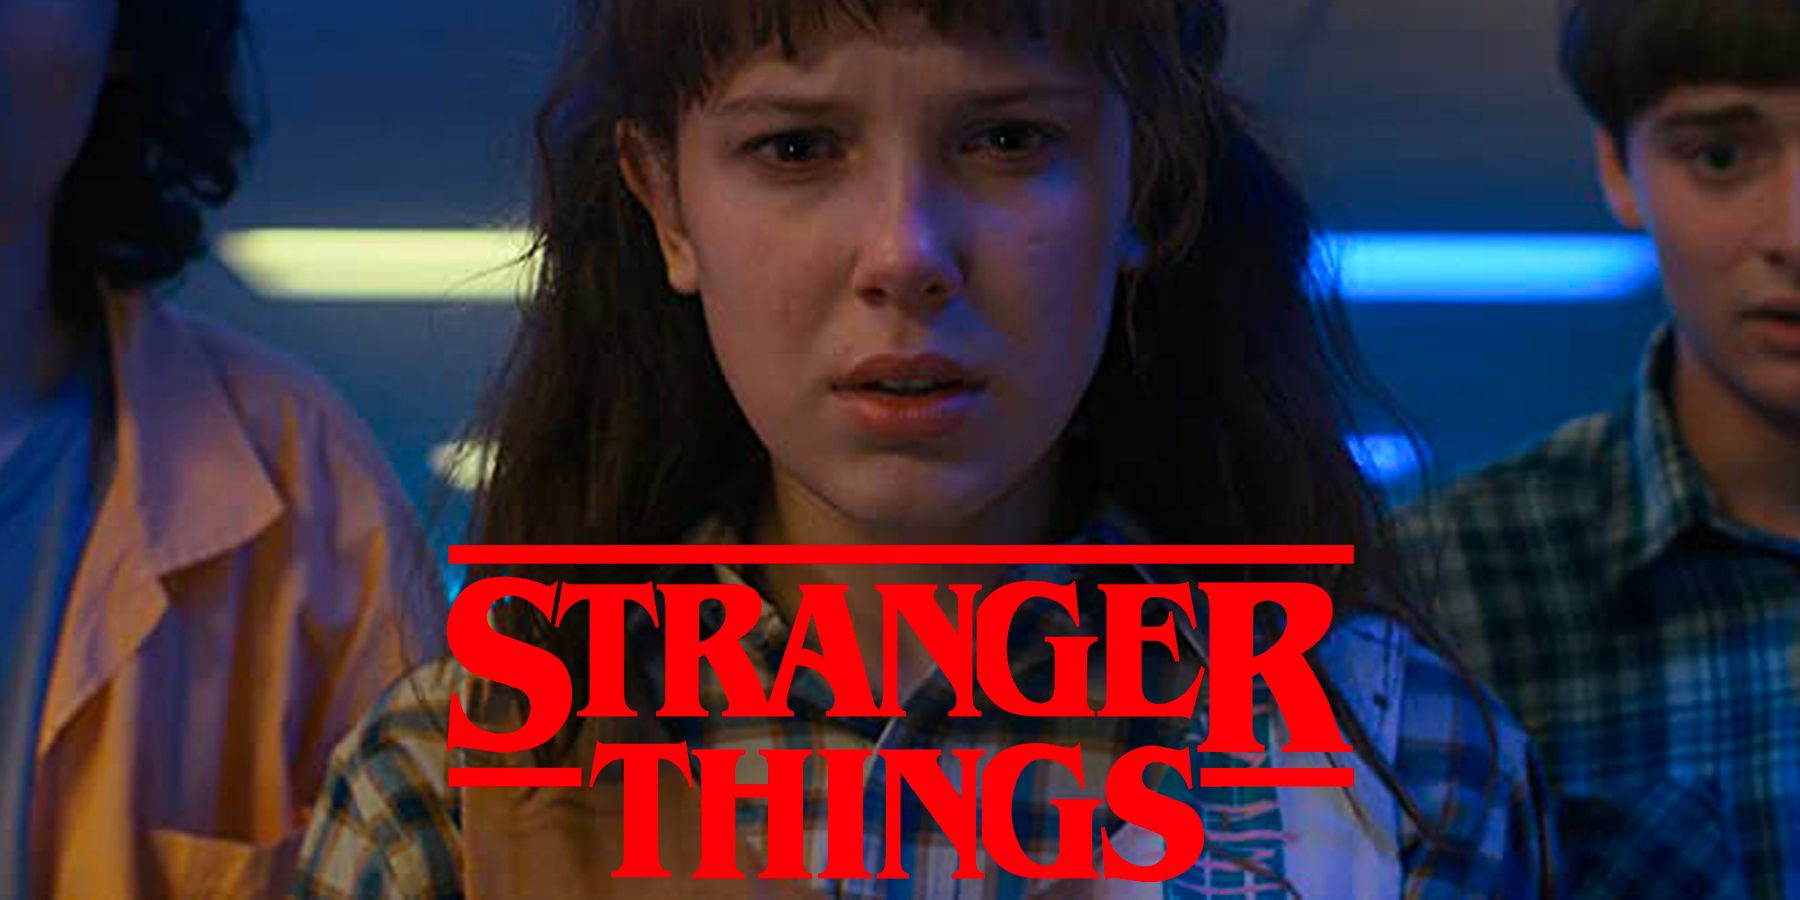 Stranger Things Netflix Most-Watched English Show